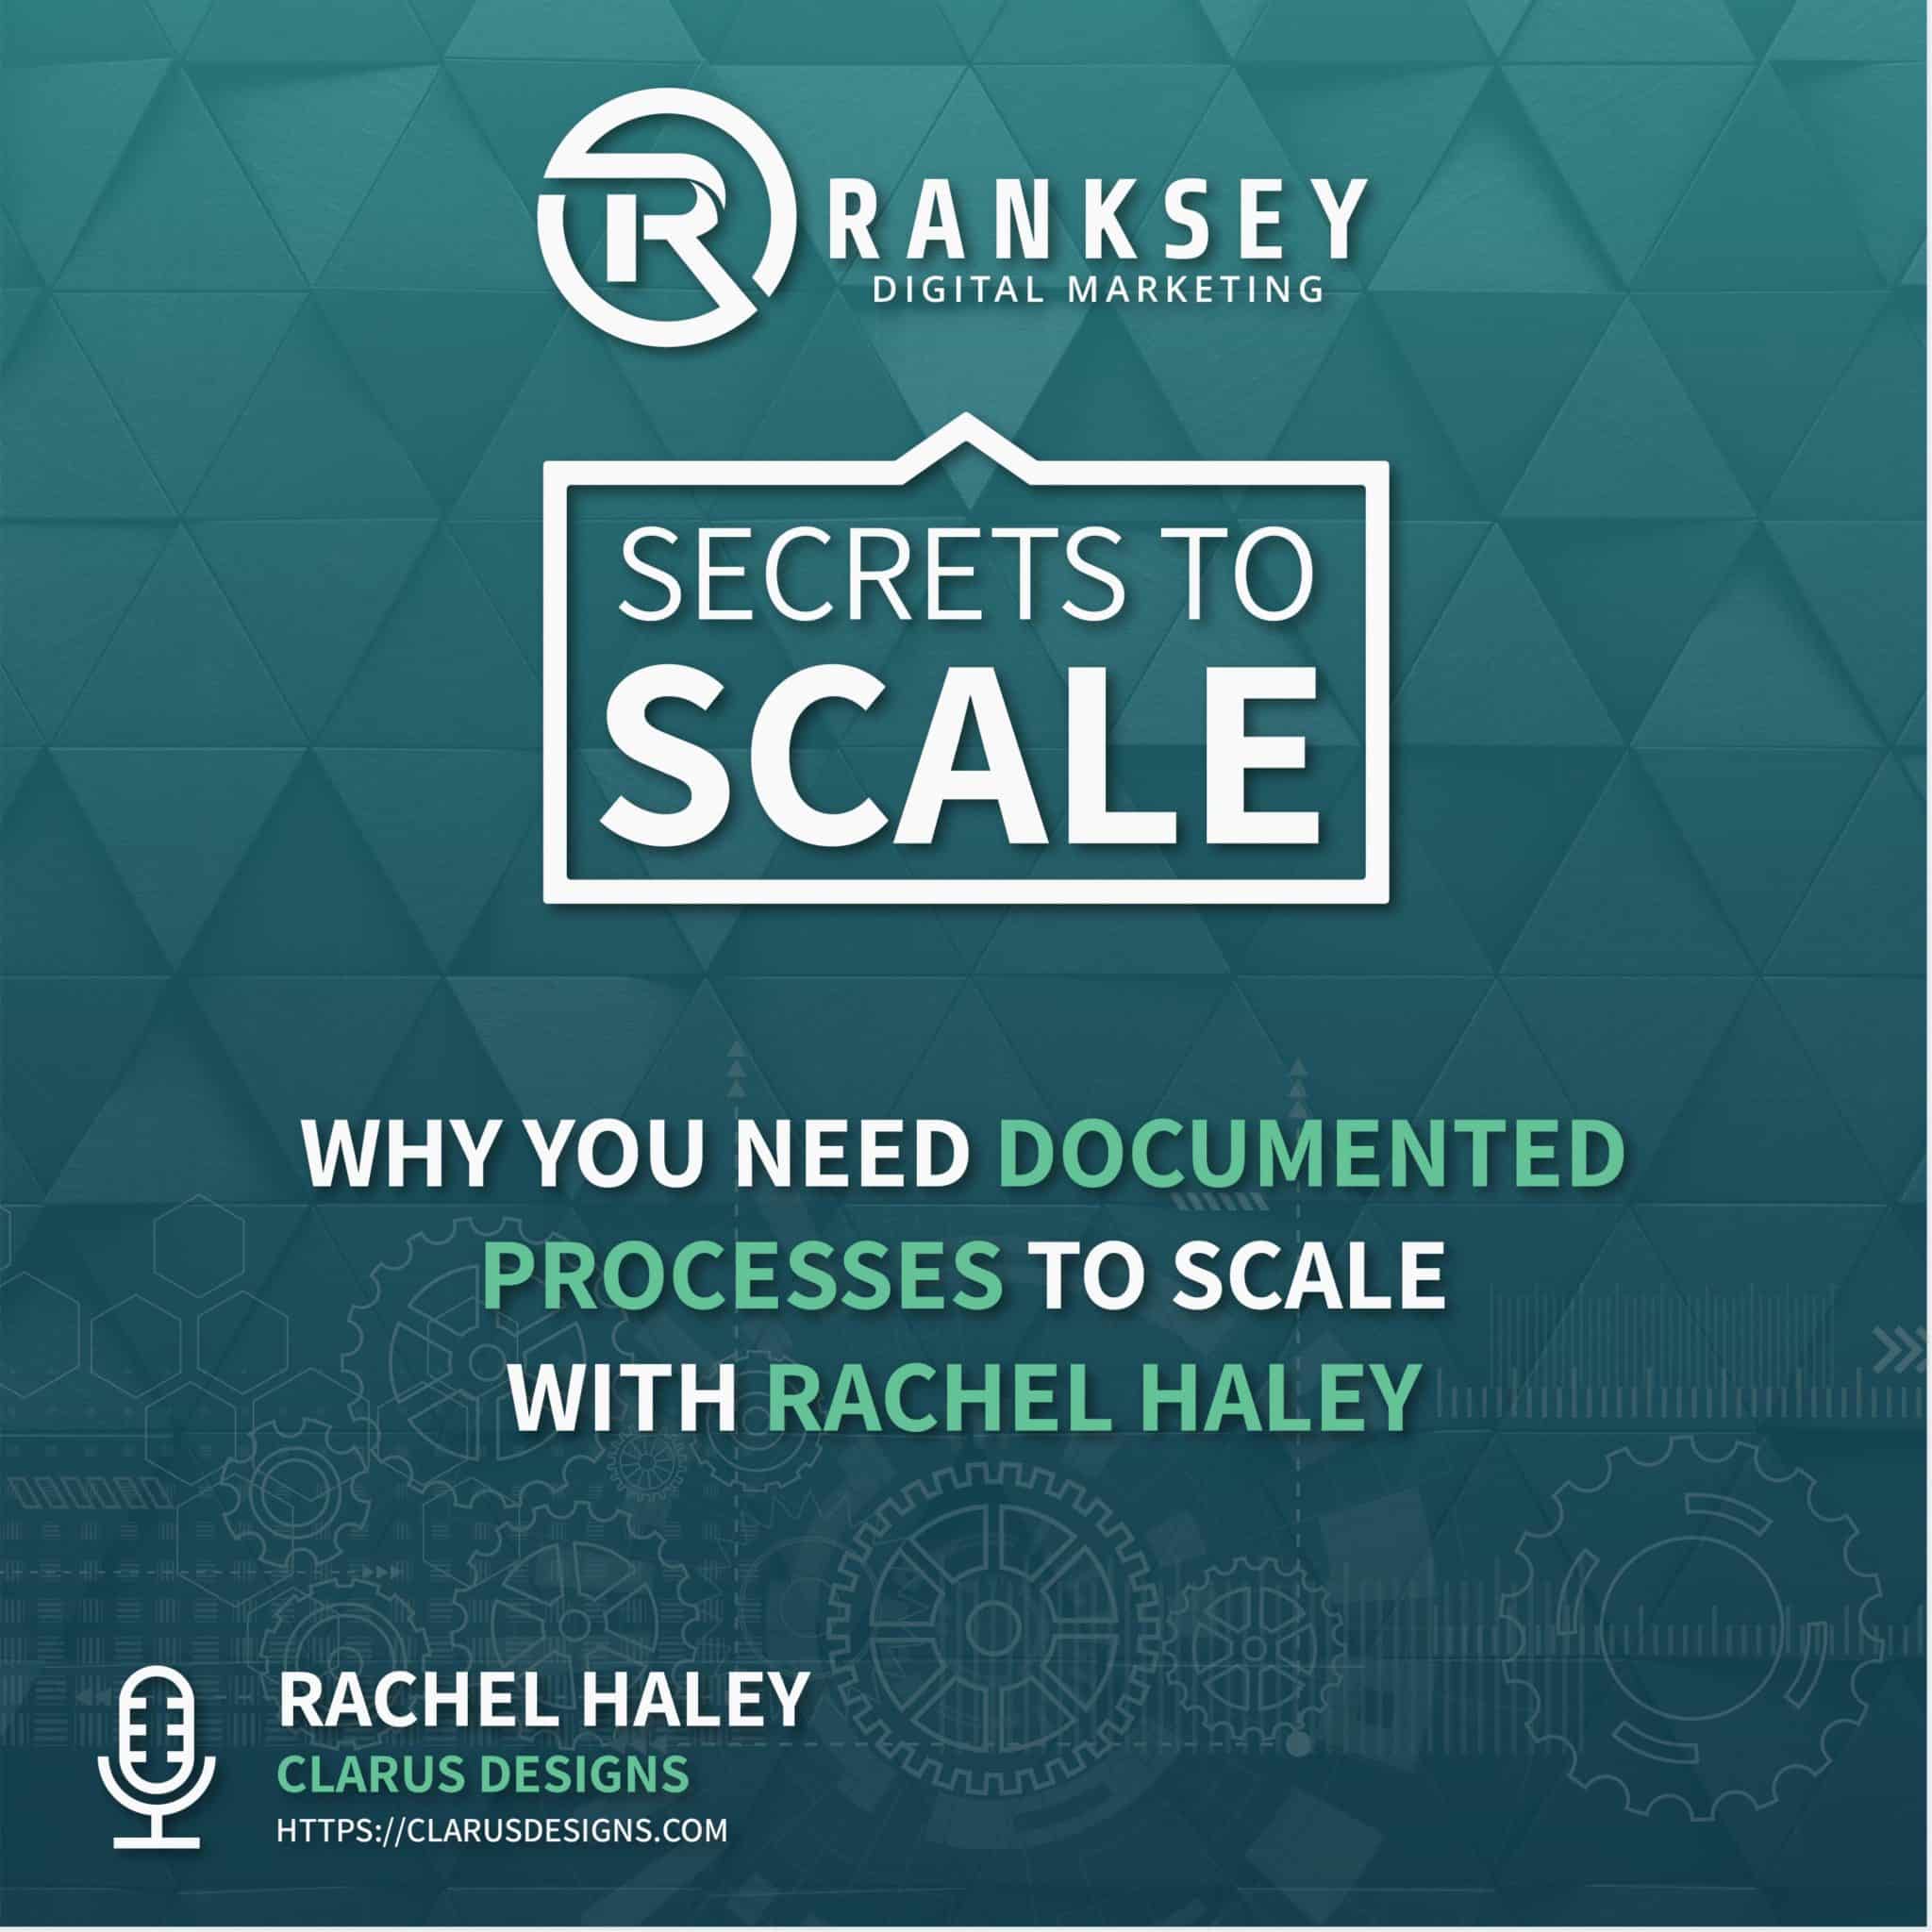 035 - Why You Need Documented Processes To Scale With Rachel Haley